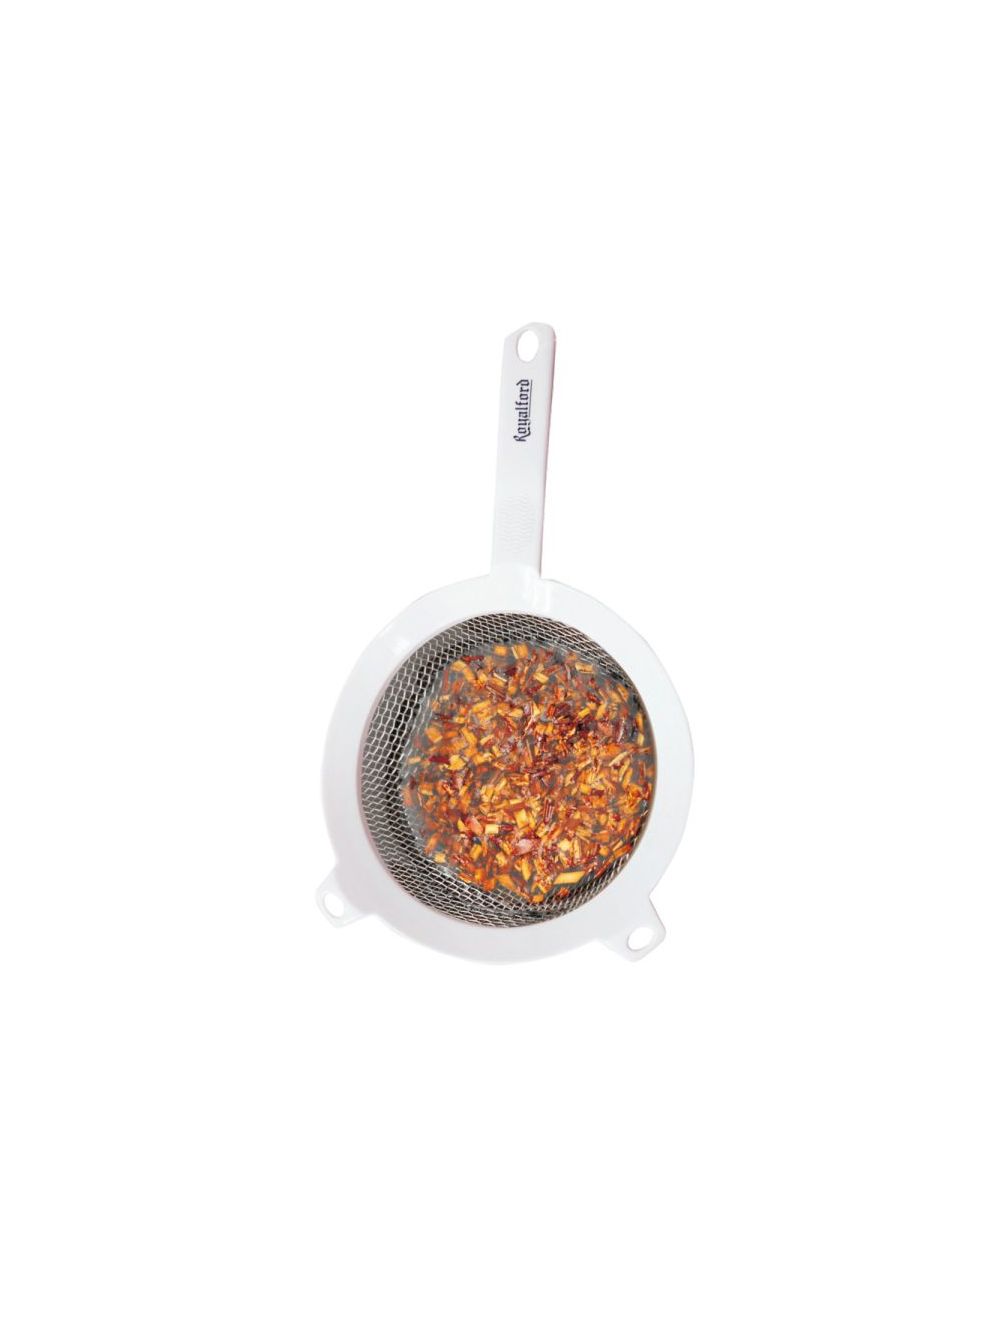 Royalford RF1673-S4 Stainless Steel Strainer with Gripped Handle, 4 Inch